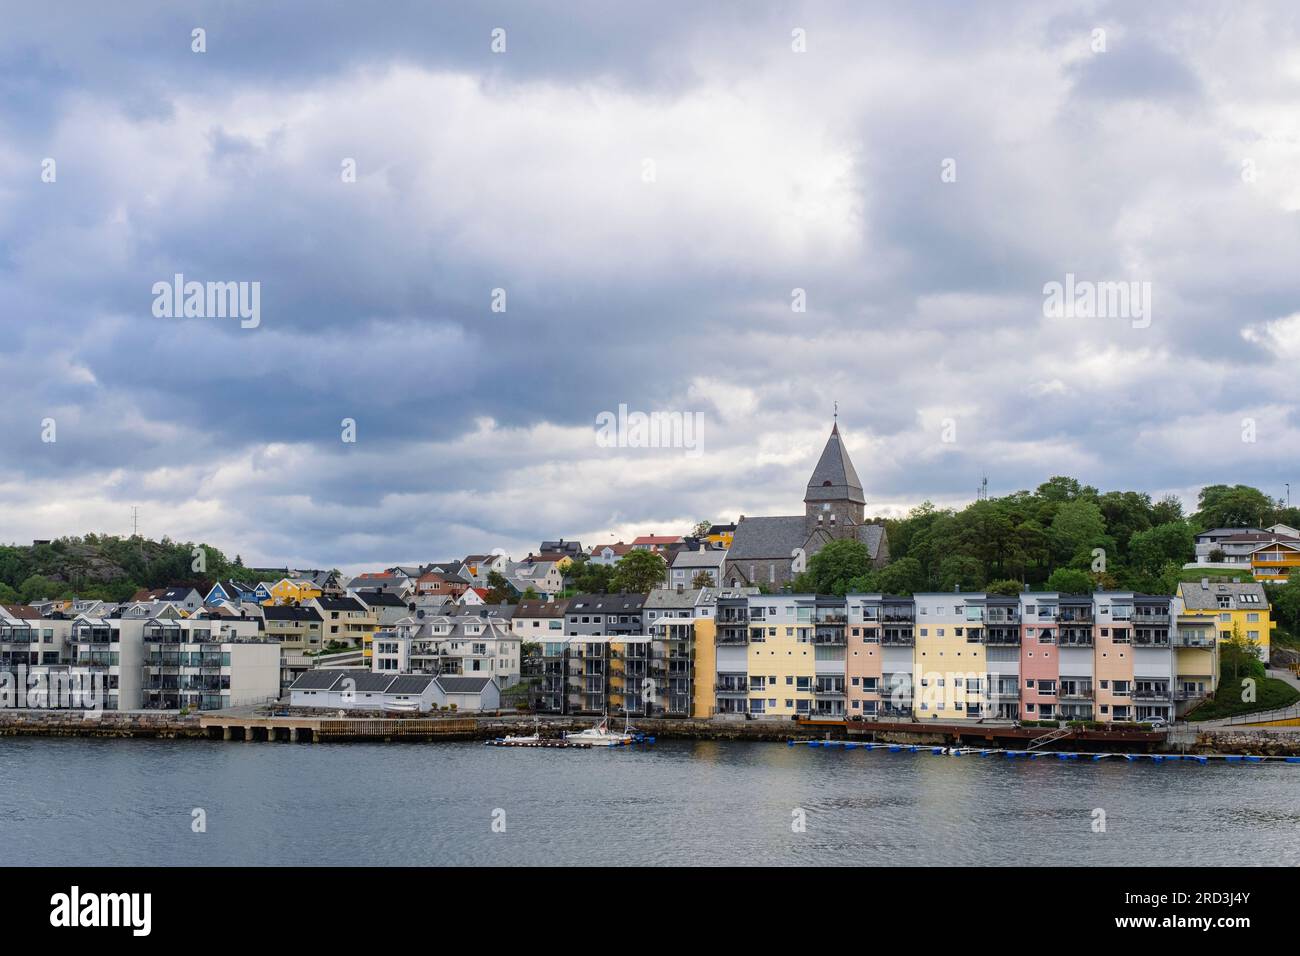 View across harbour to modern waterfront buildings and Nordlandet kirke or North Country Church on Nordlandet island. Kristiansund, Norway Stock Photo